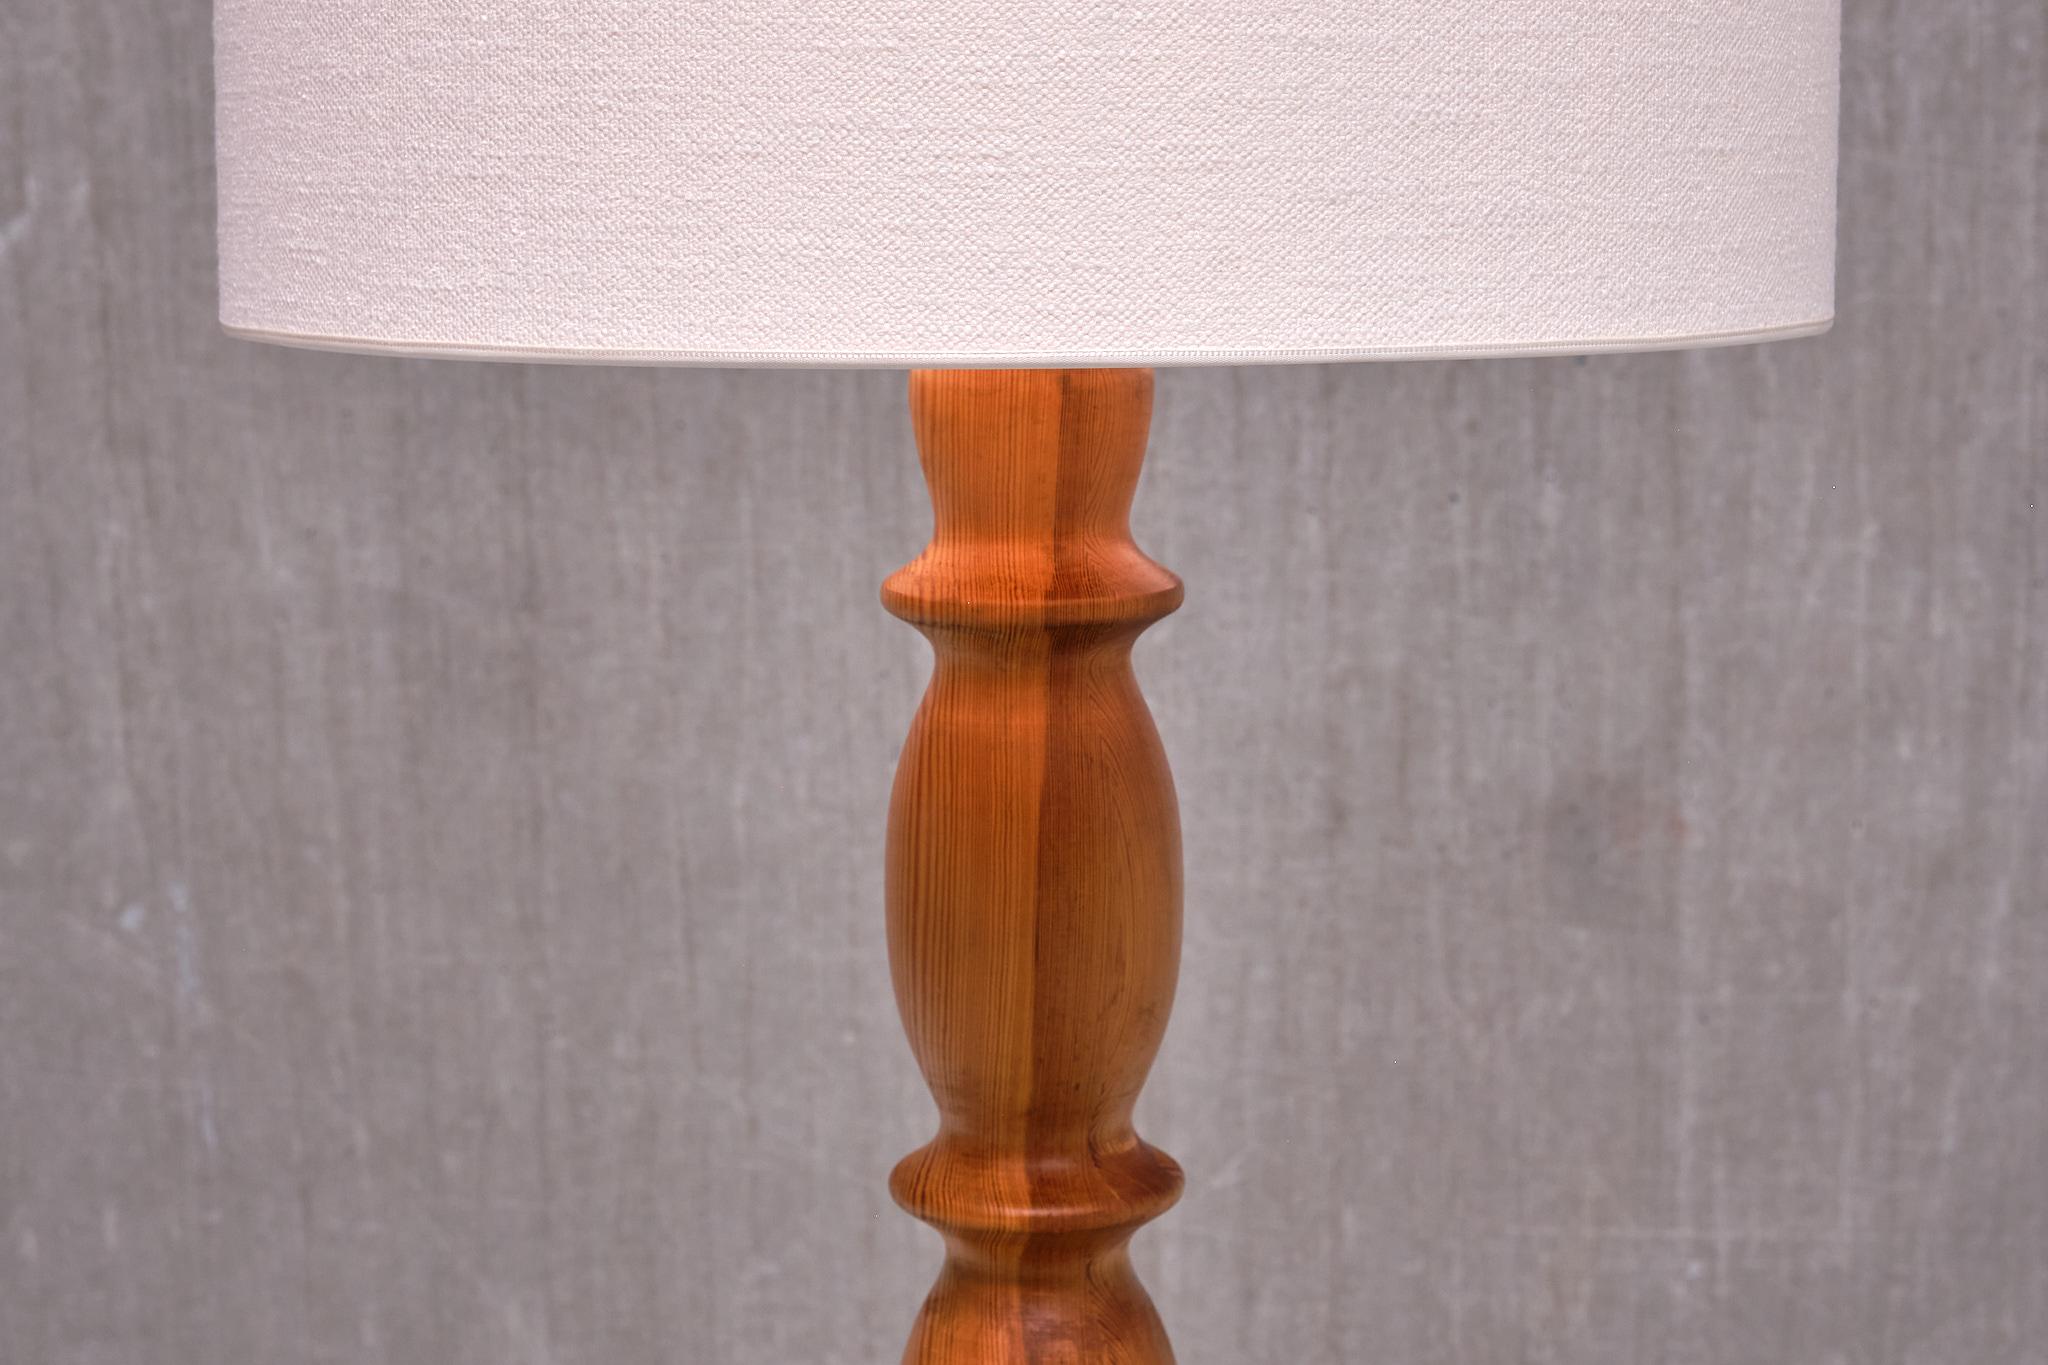 Swedish Modern Floor Lamp in Carved Solid Pine Wood, 1960s For Sale 5